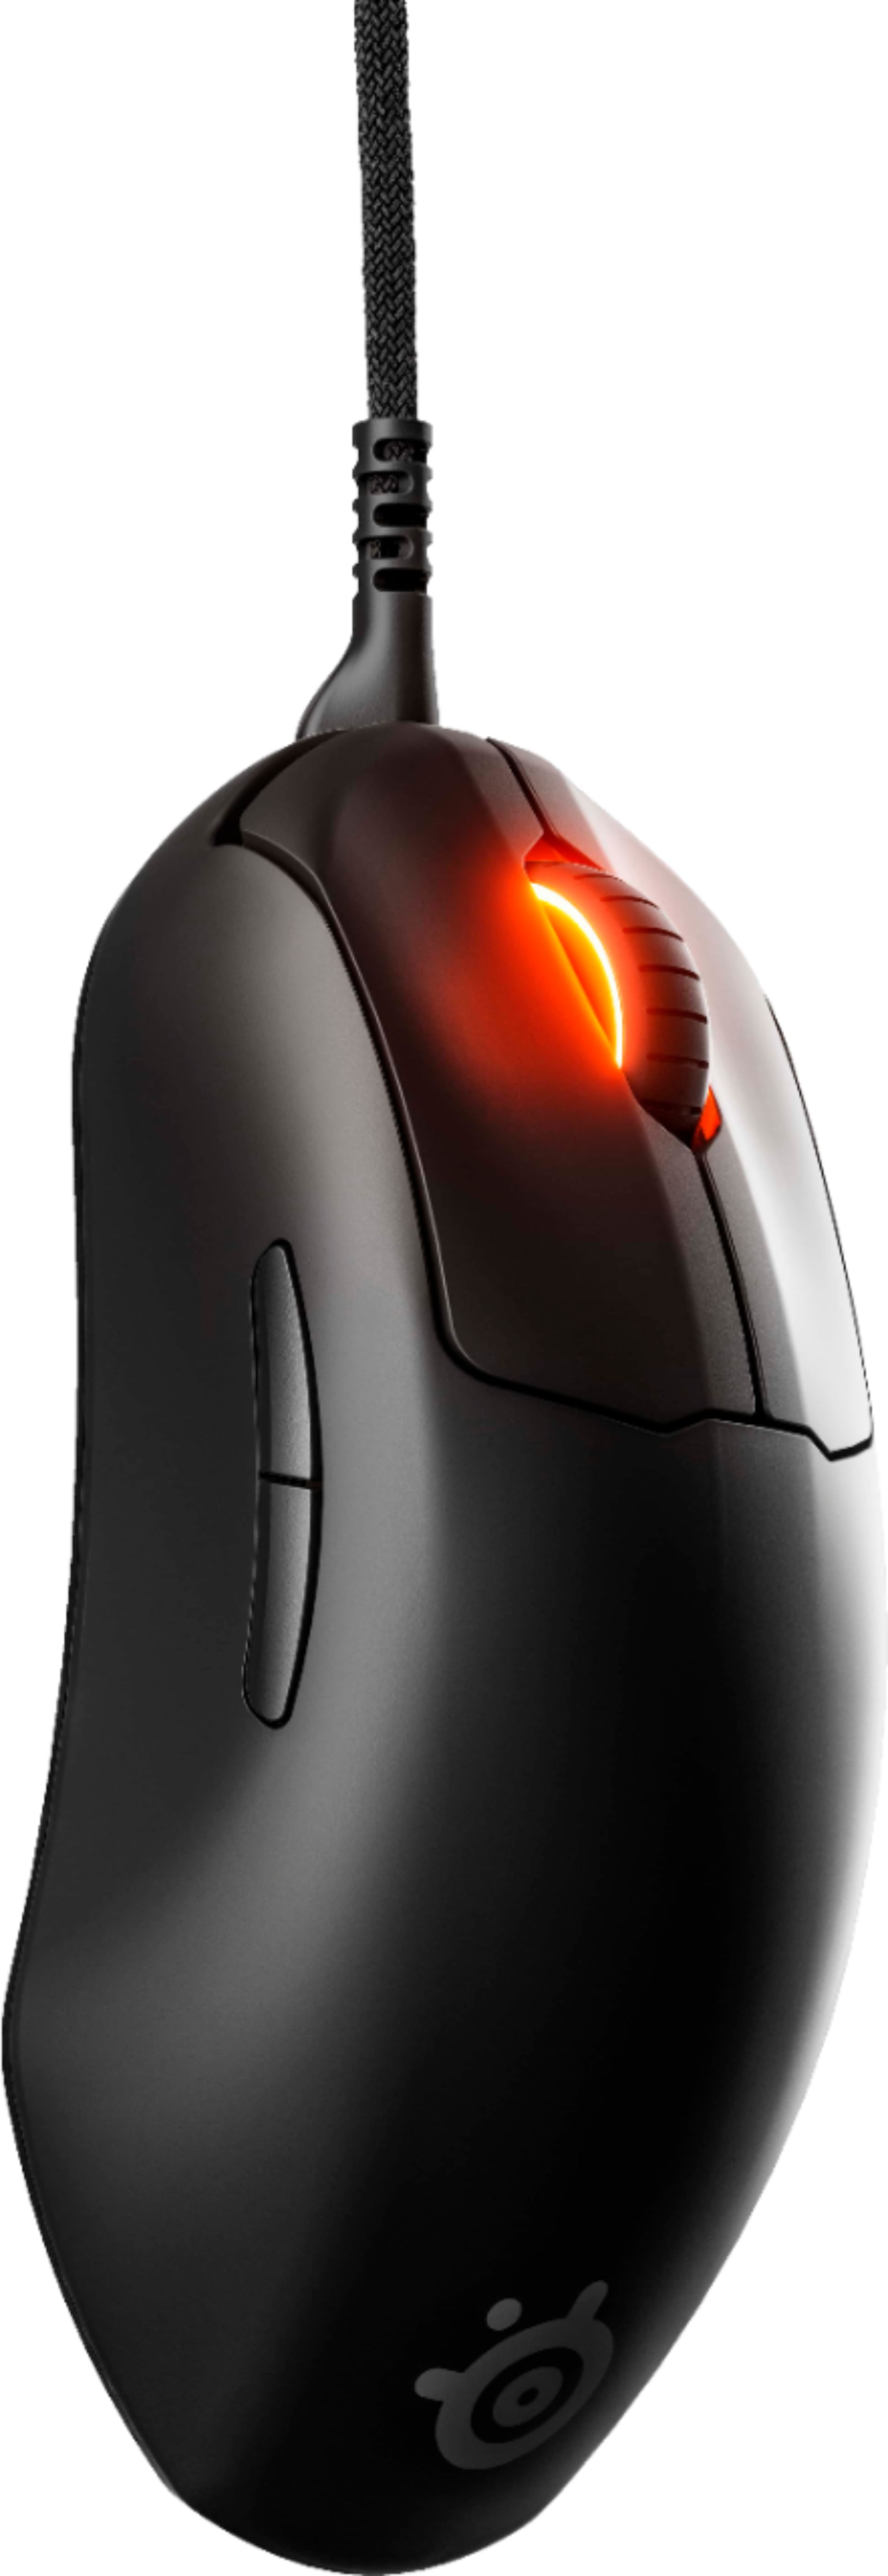 Angle View: SteelSeries - Prime + Lightweight Wired Optical Gaming Mouse with RGB Lighting - Black